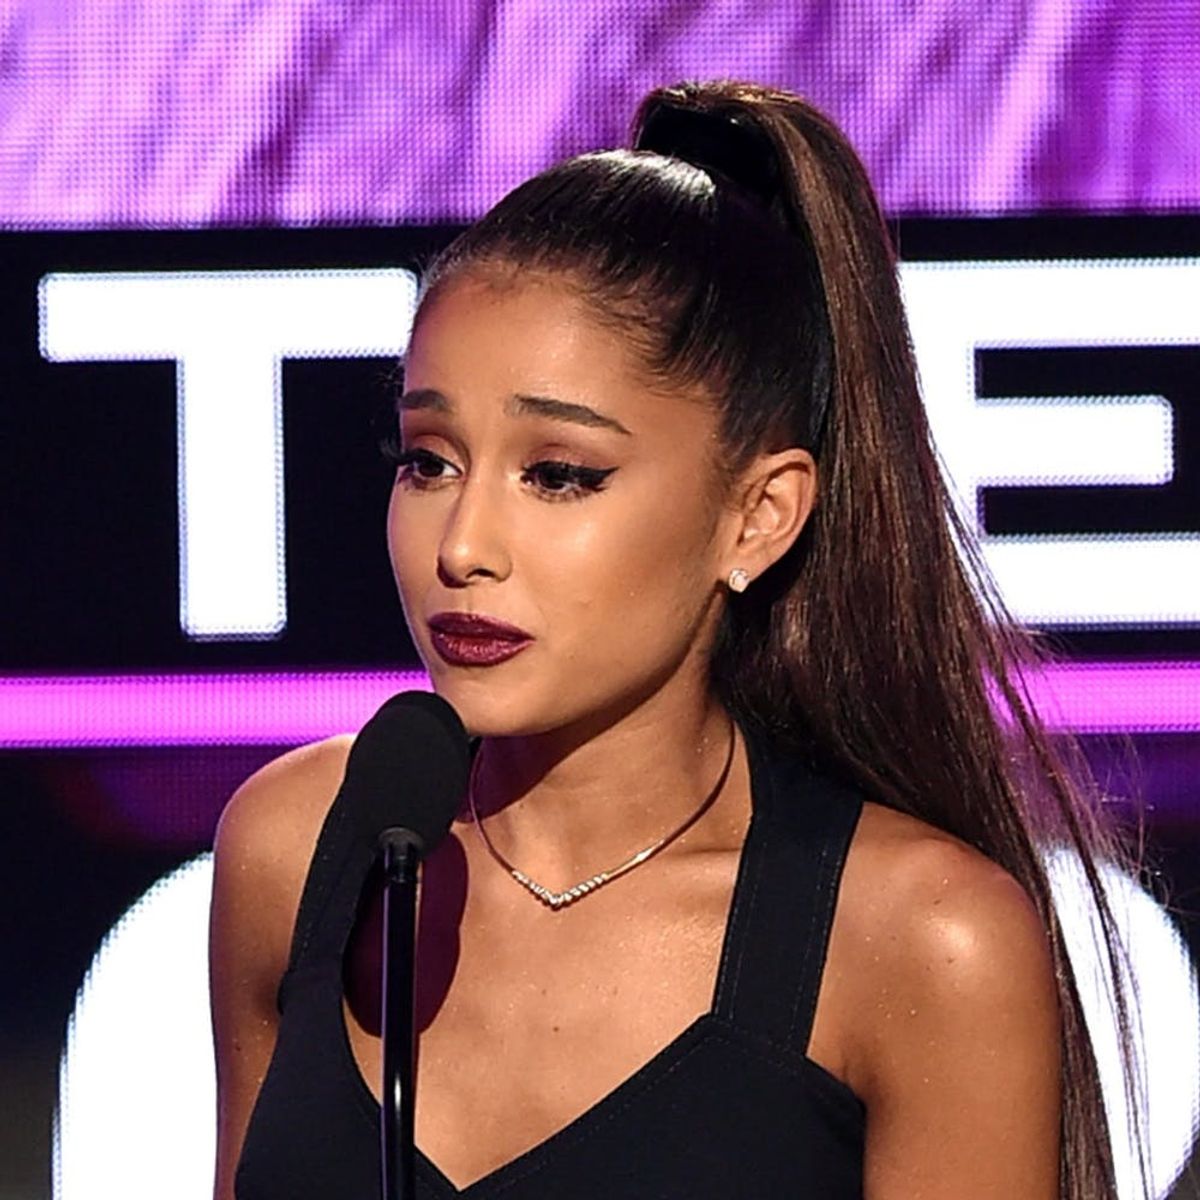 Ariana Grande and More Celebs React to the News of the Manchester Explosion